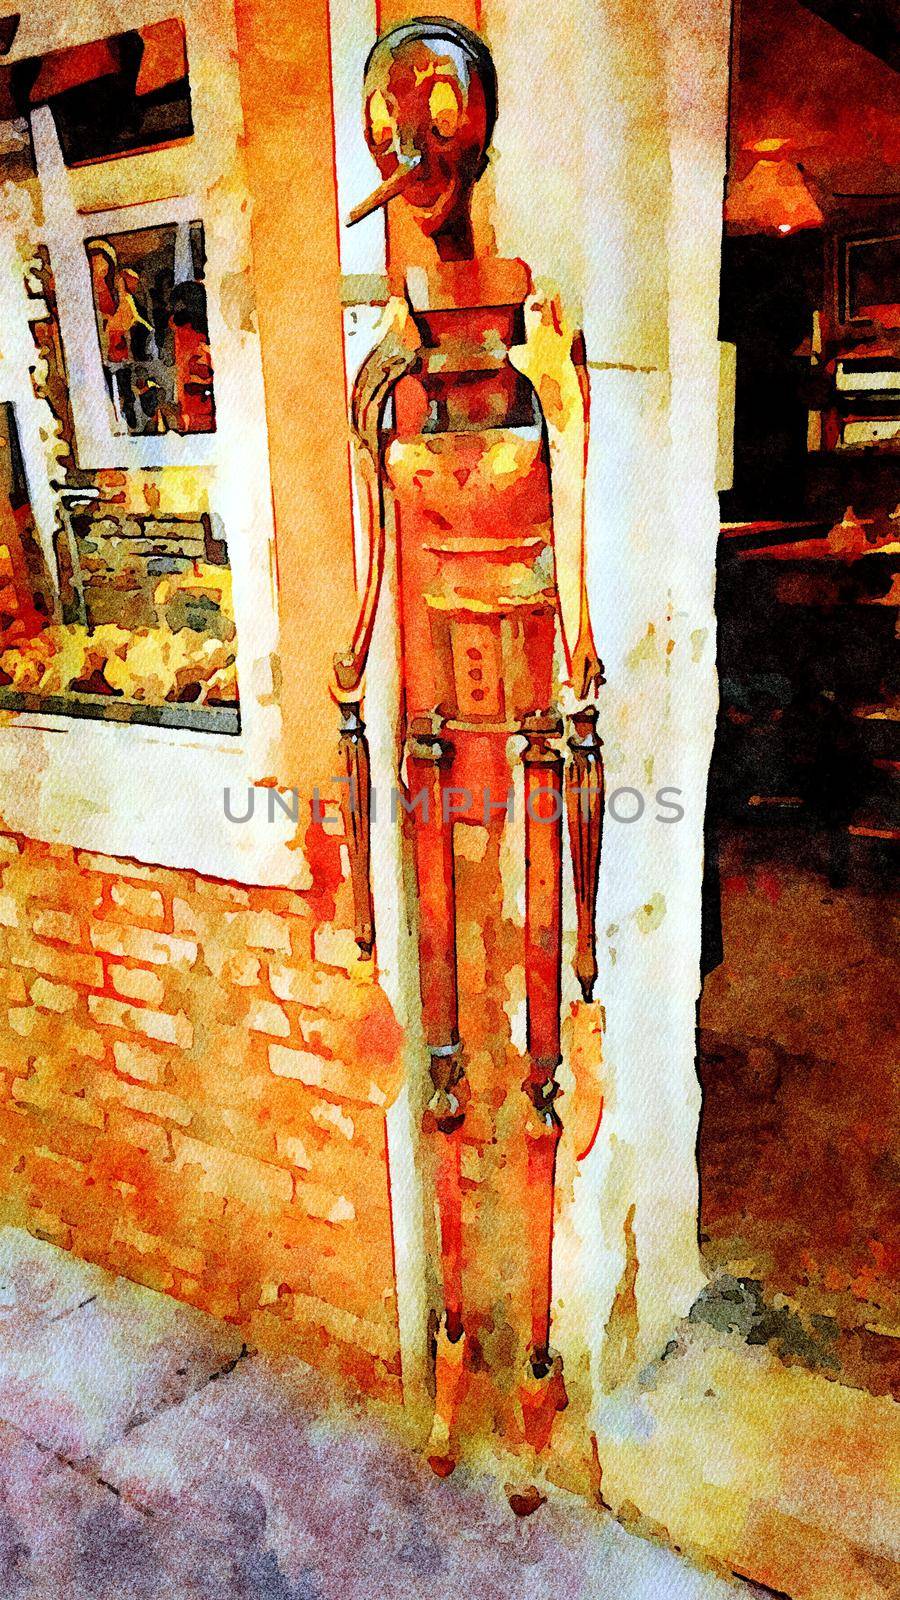 Watercolor representing Pinocchio's wooden puppet in a small street in the historic center of Venice